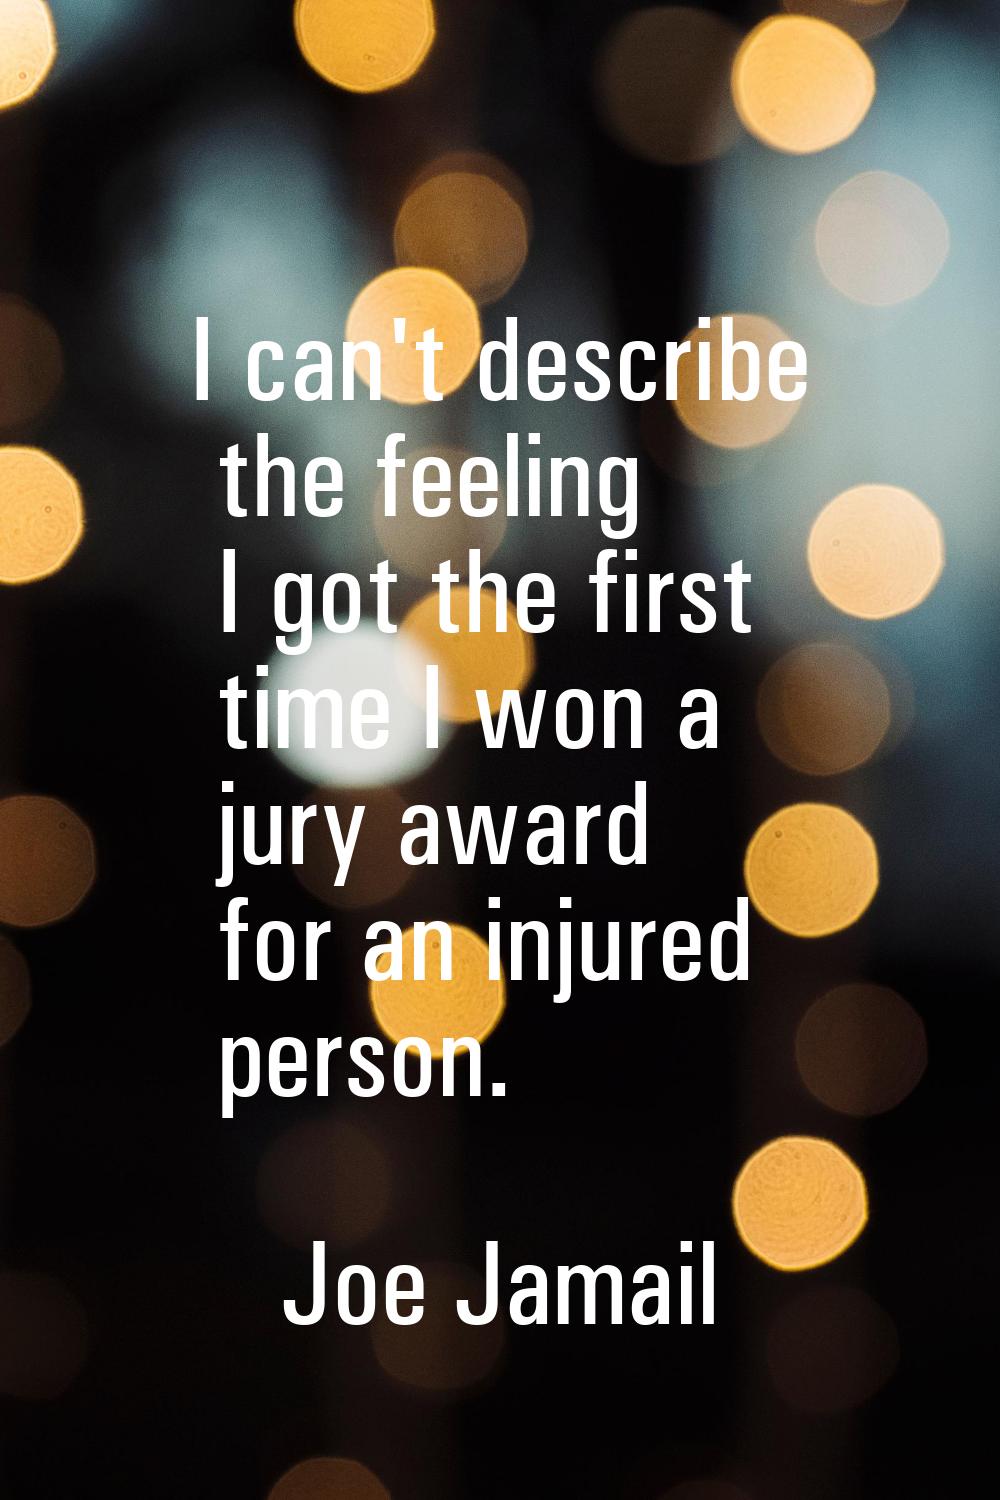 I can't describe the feeling I got the first time I won a jury award for an injured person.